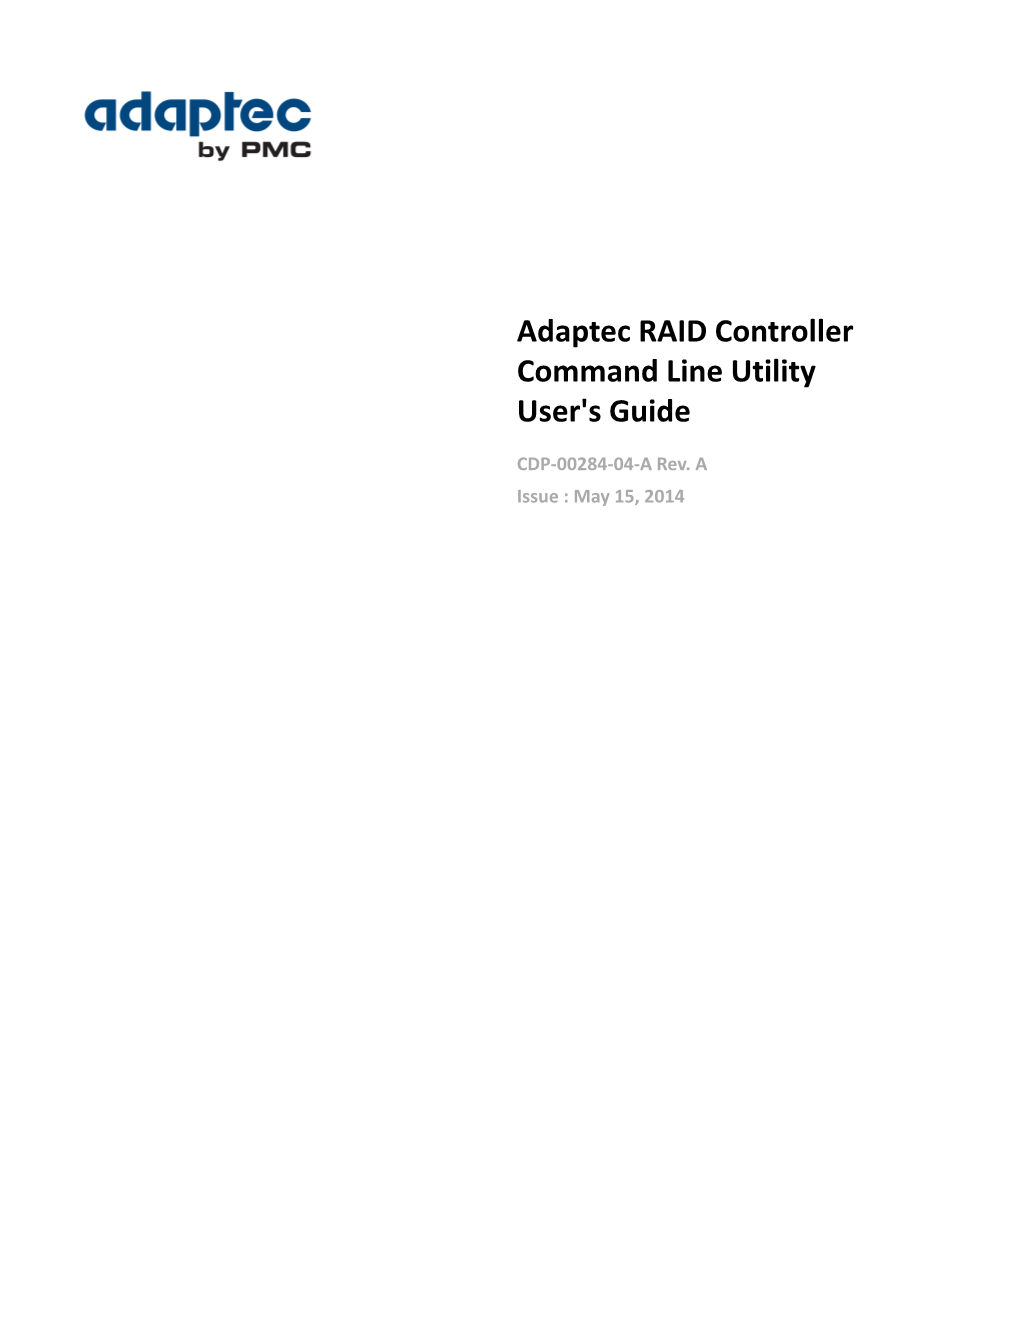 Adaptec RAID Controller Command Line Utility User's Guide